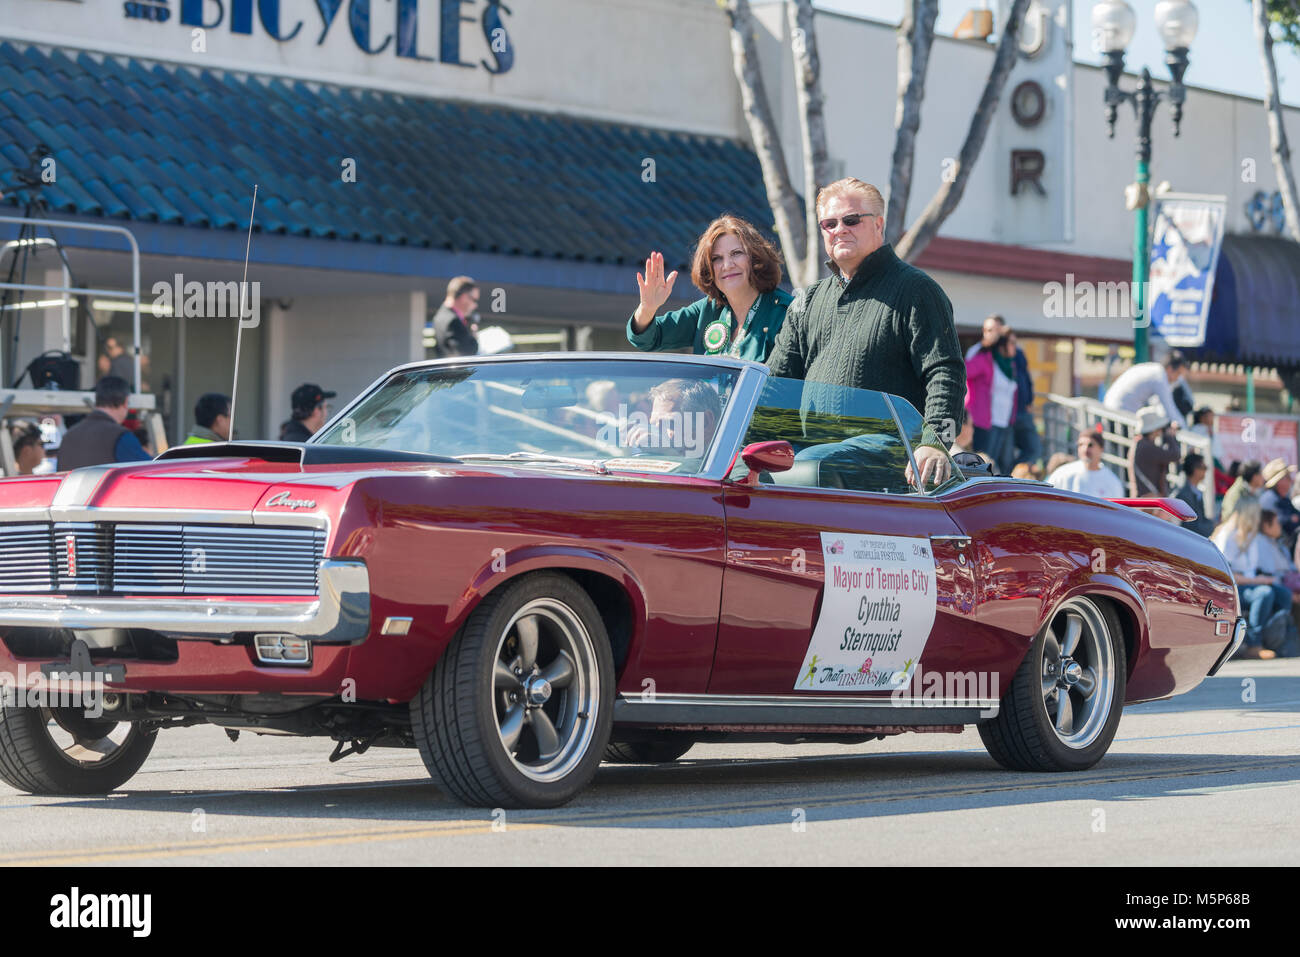 Temple City, Los Angeles, California, USA. 24th February, 2018. Cynthia Sternquist, Mayor. The famous 74th Camellia Festival Parade on FEB 24, 2018 at Temple City, Los Angeles County, California Credit: Chon Kit Leong/Alamy Live News Stock Photo